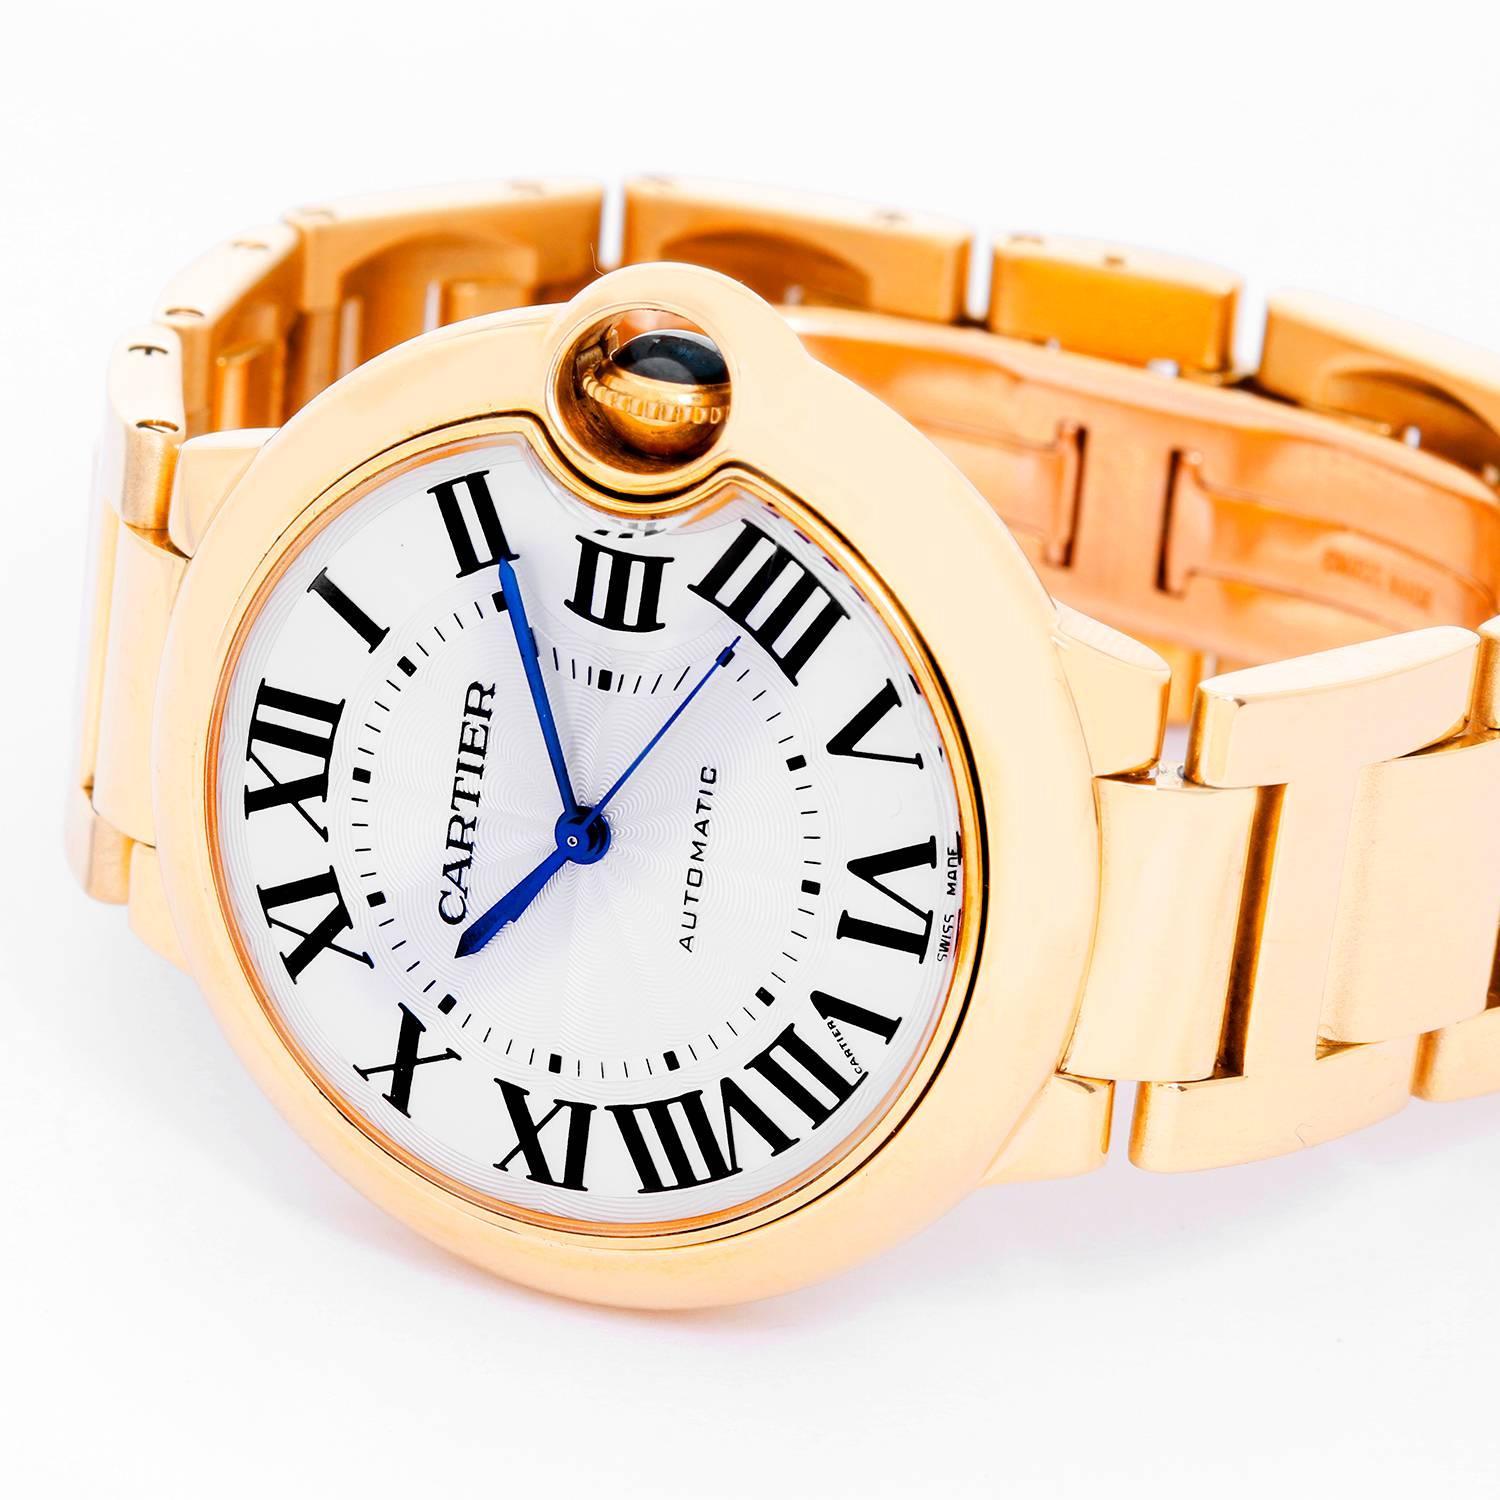 Cartier Ballon Bleu Midsize 18k Yellow Gold Watch W69003Z2 -  Automatic winding. 18k yellow gold case (36mm). Silver guilloche dial with black Roman numerals. 18k yellow gold Cartier bracelet with deployant clasp. Pre-owned with box and books.